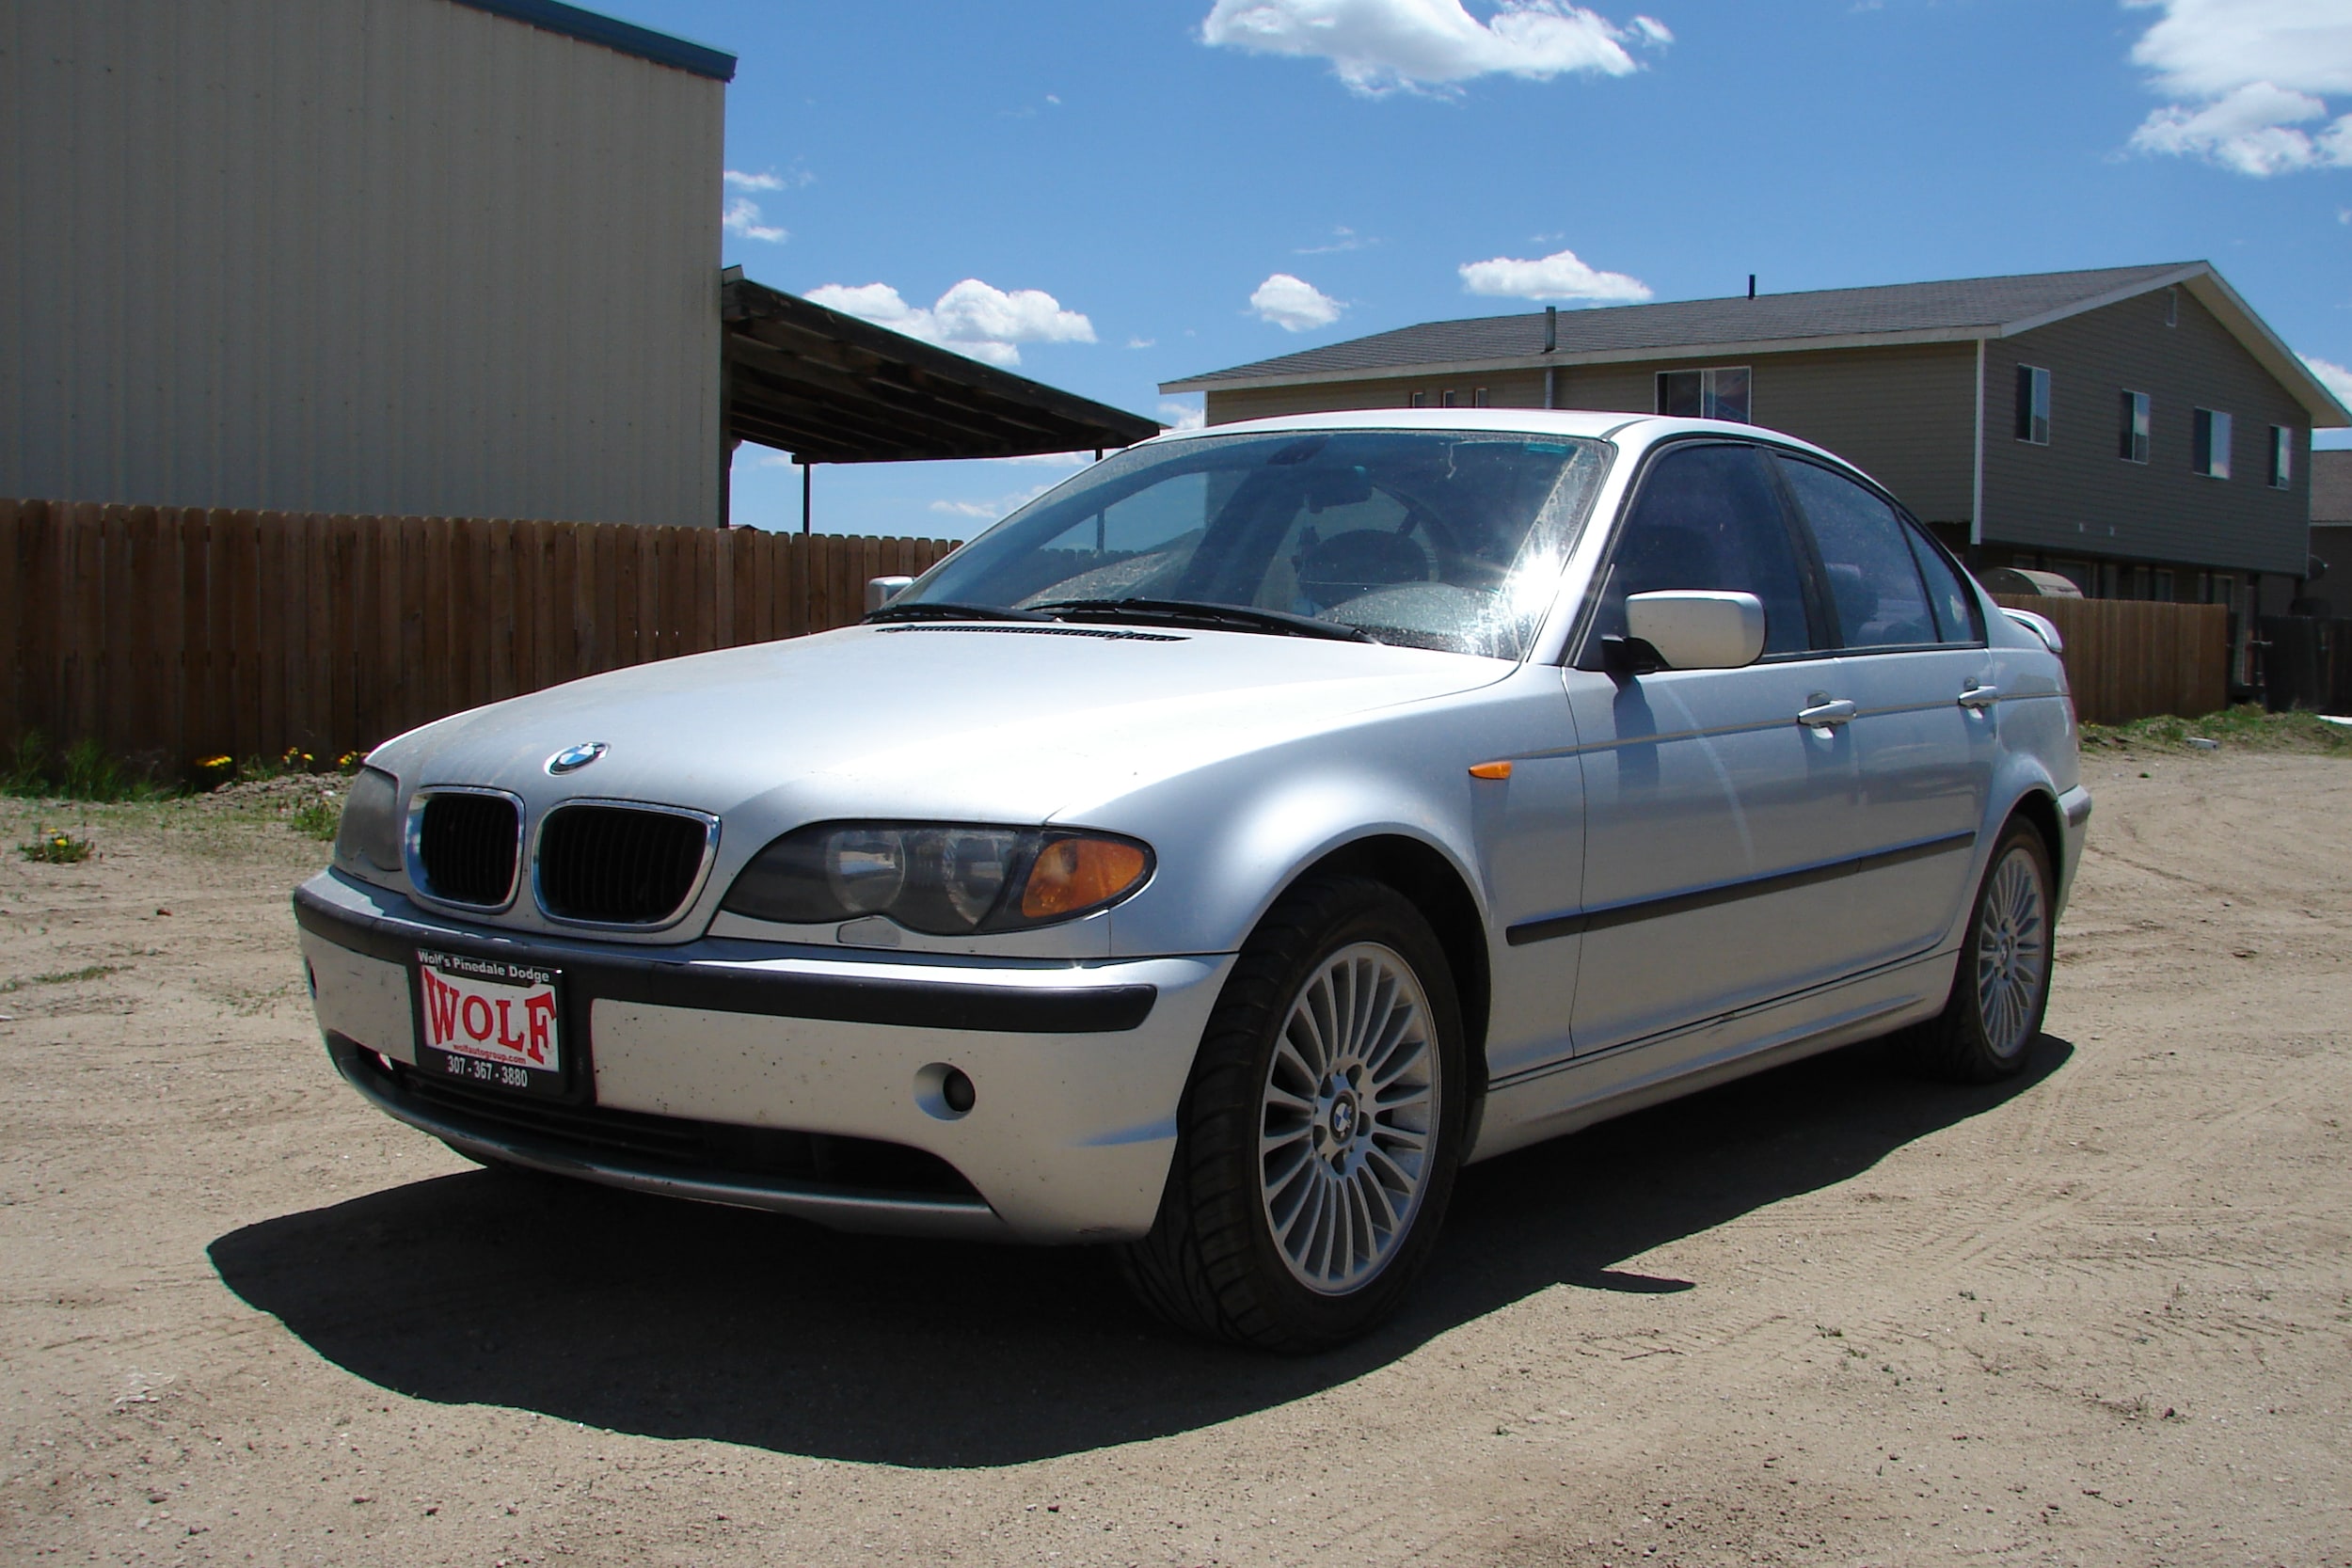 Used 2003 bmw 325xi for sale #4